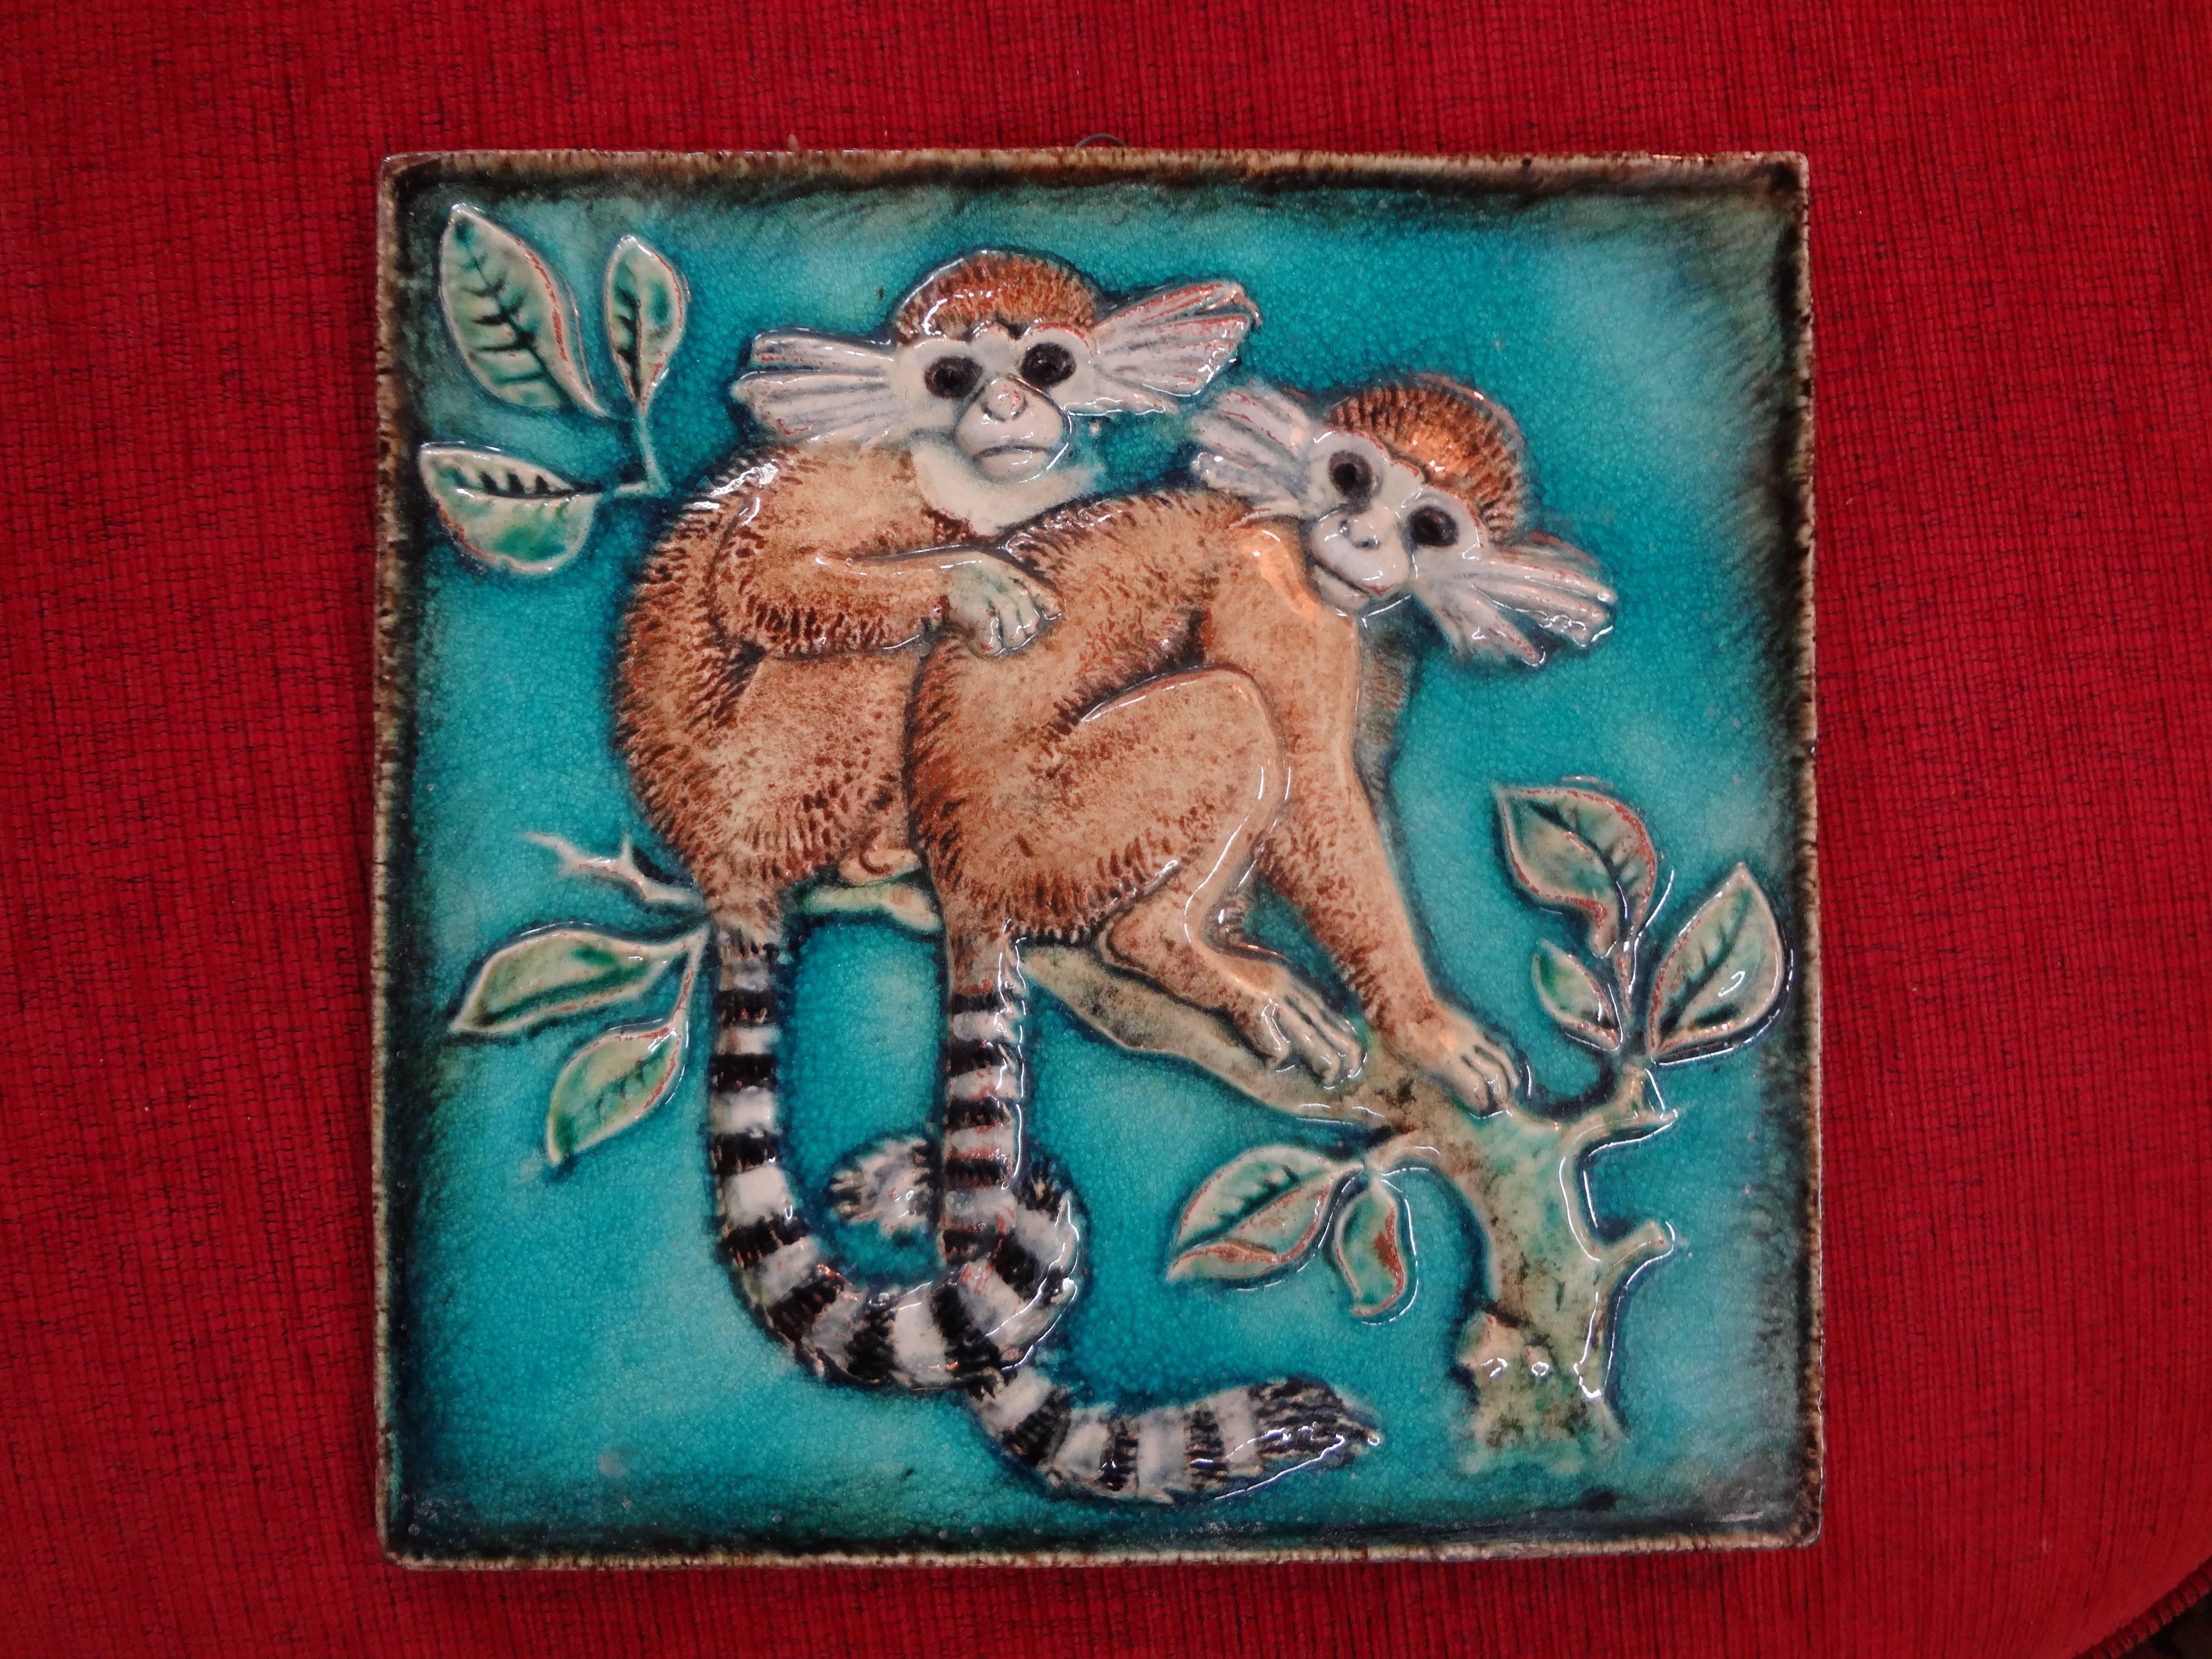 German glazed terracotta monkey tile by Karlshrue.
German glazed terra cotta or Majolica monkey tile by Karlshrue, circa 1920. This gorgeous wall art depicts two monkeys on a tree branch. Well detailed and beautiful colors. This piece has an